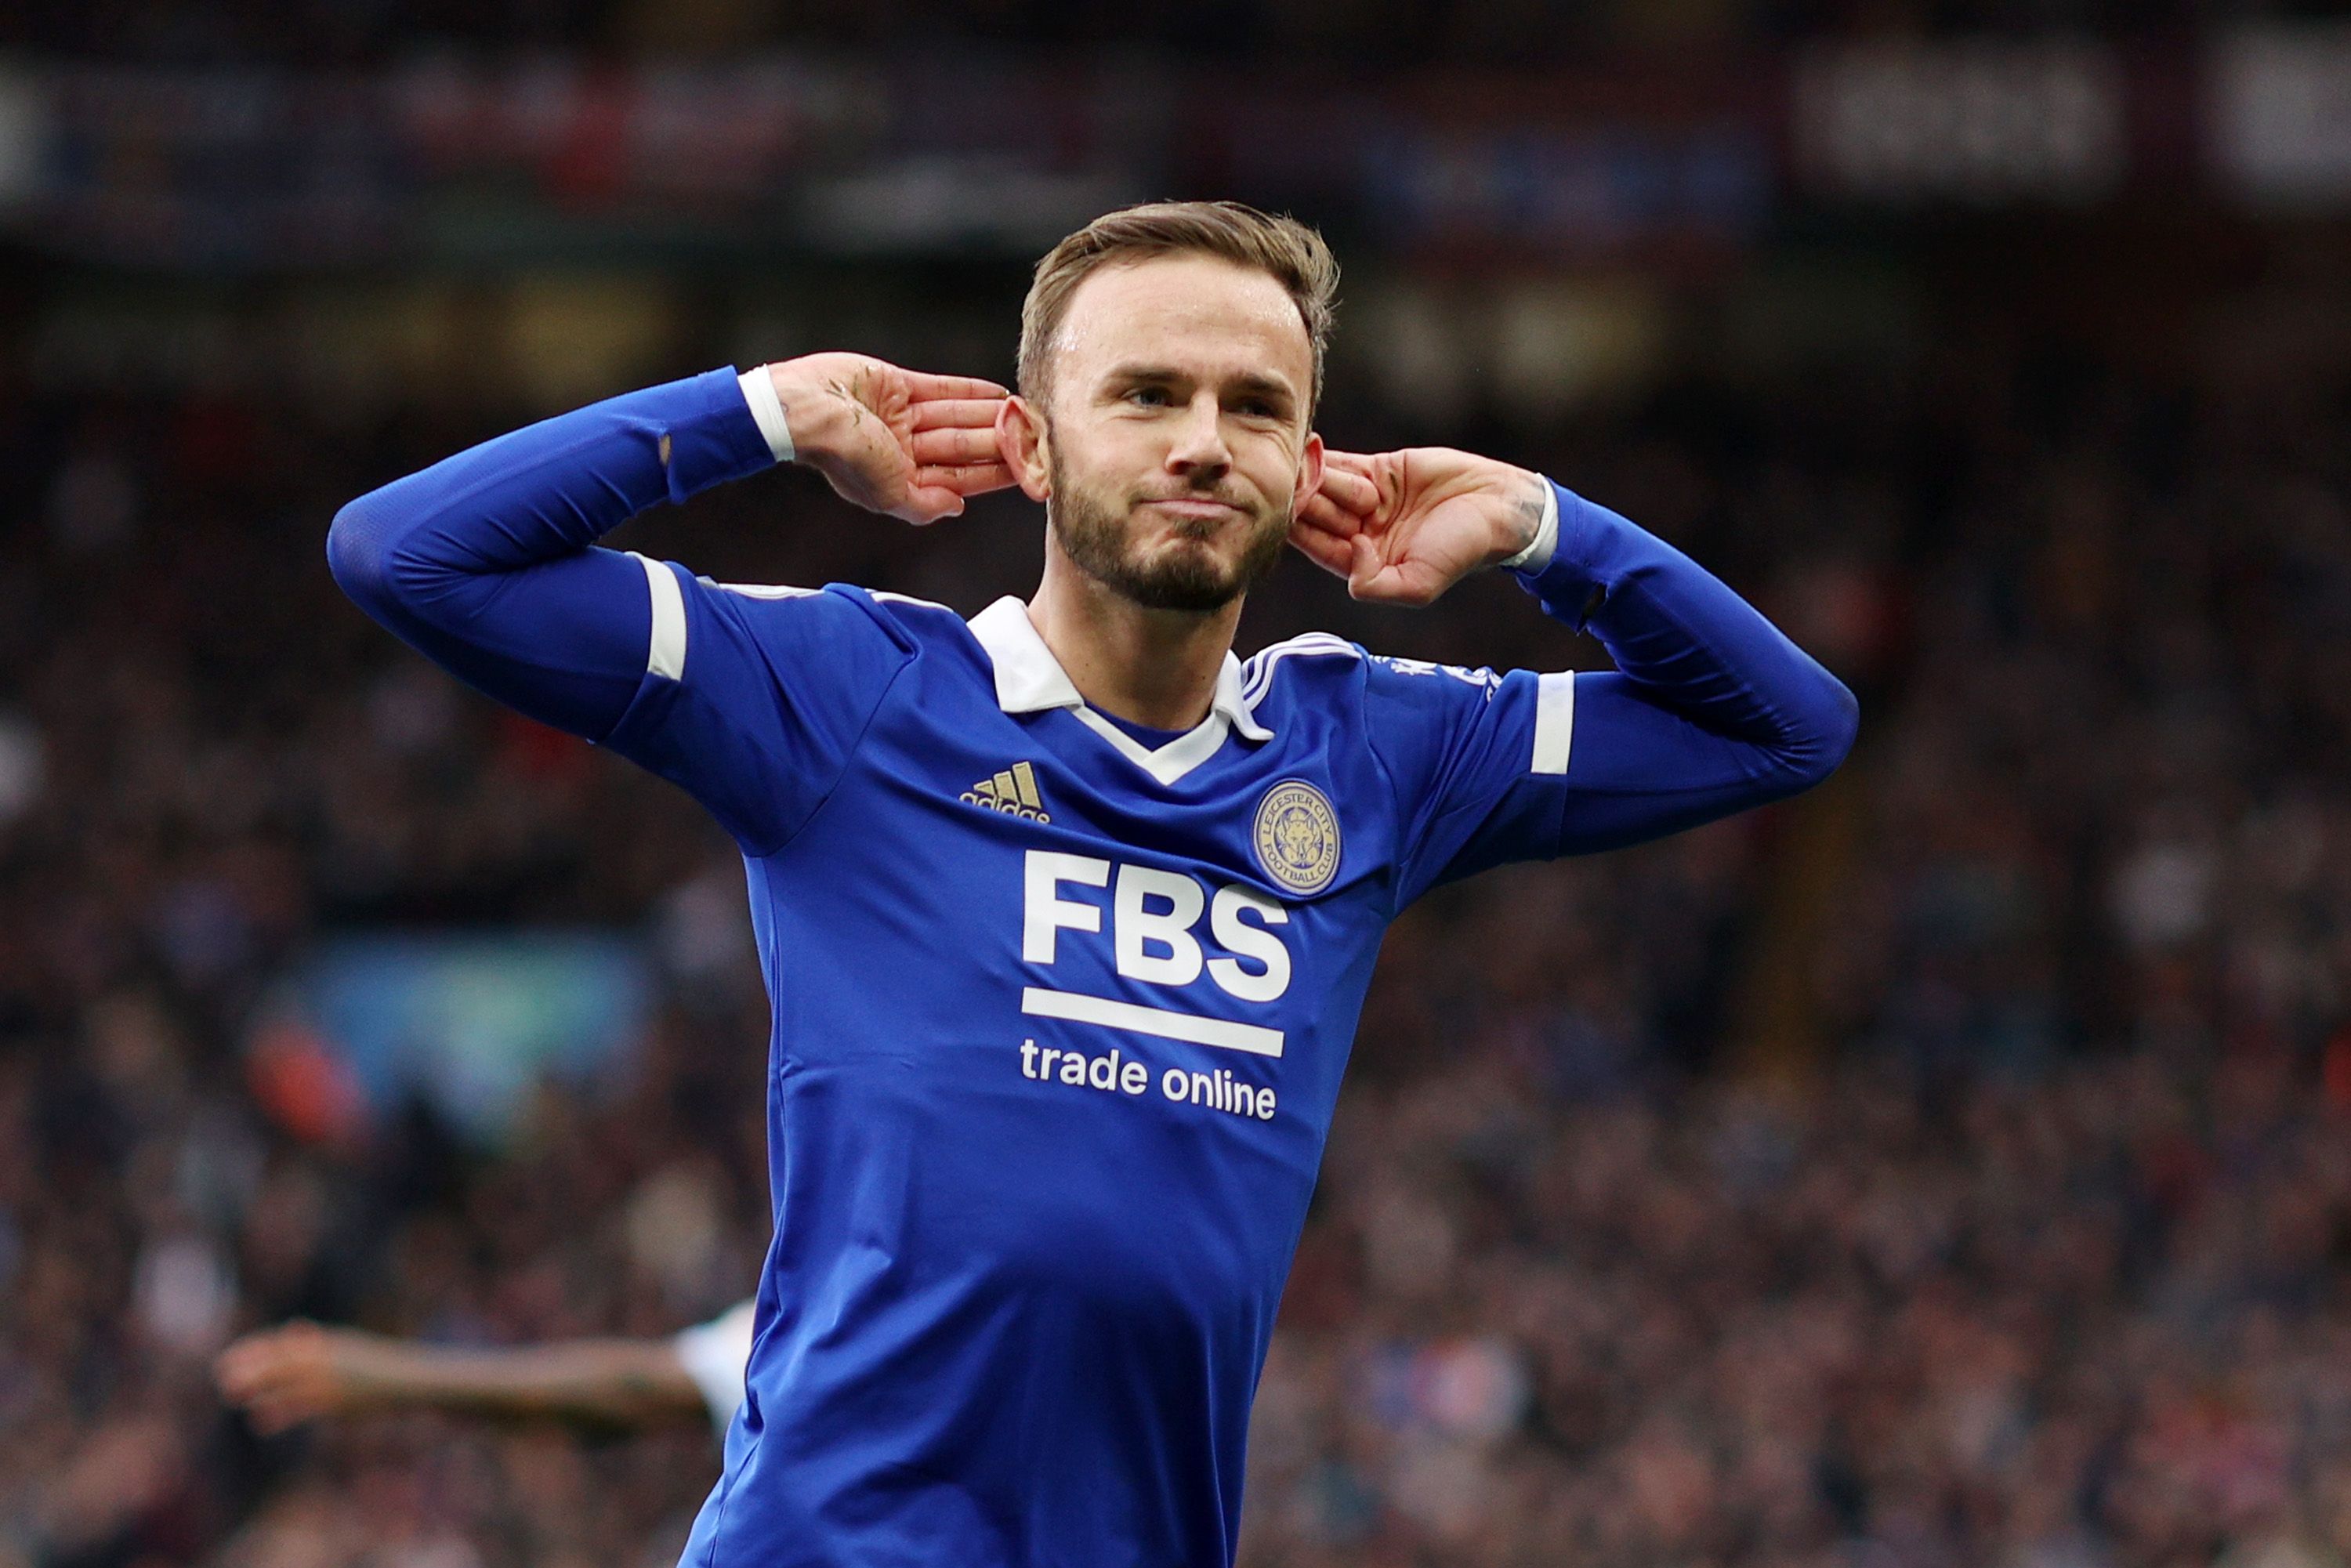 FEBRUARY 04: James Maddison of Leicester City celebrates after scoring their sides first goal during the Premier League match between Aston Villa and Leicester City at Villa Park on February 04, 2023 in Birmingham, England.